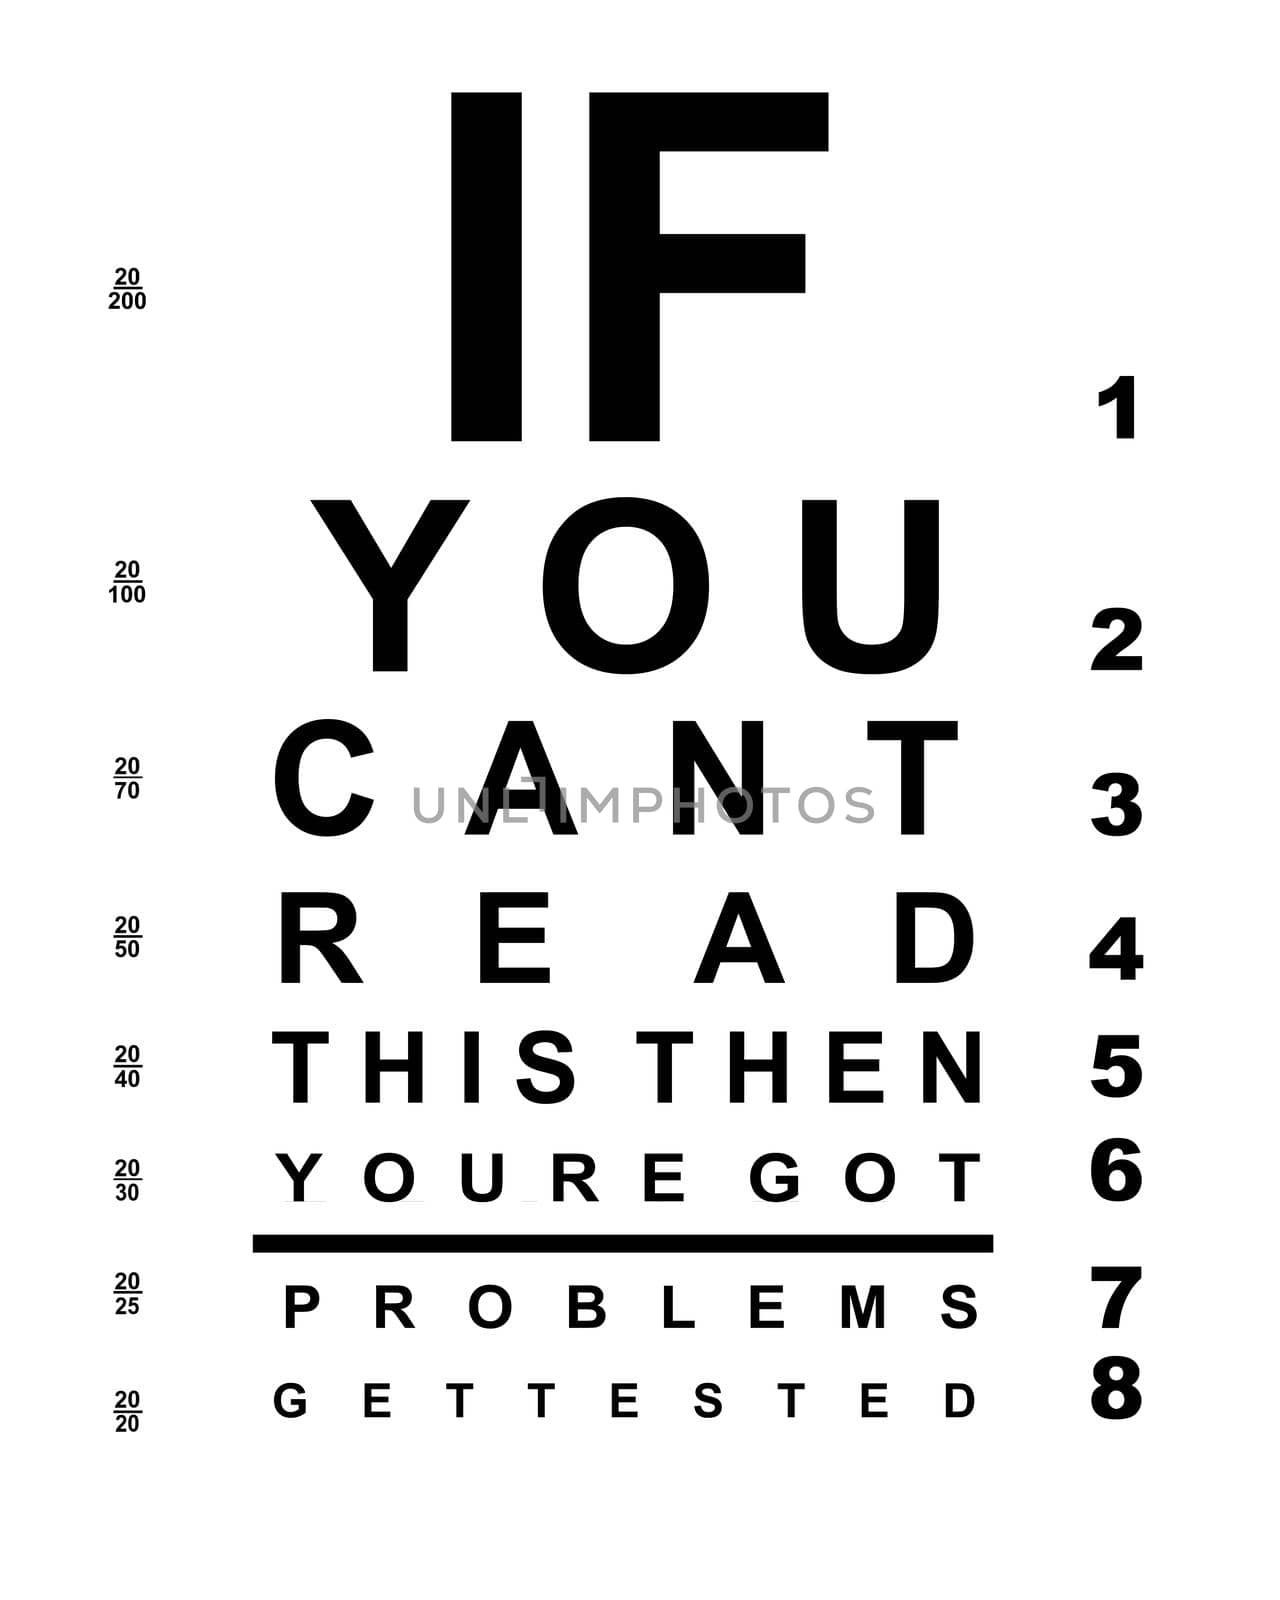 If you can read this eye test chart